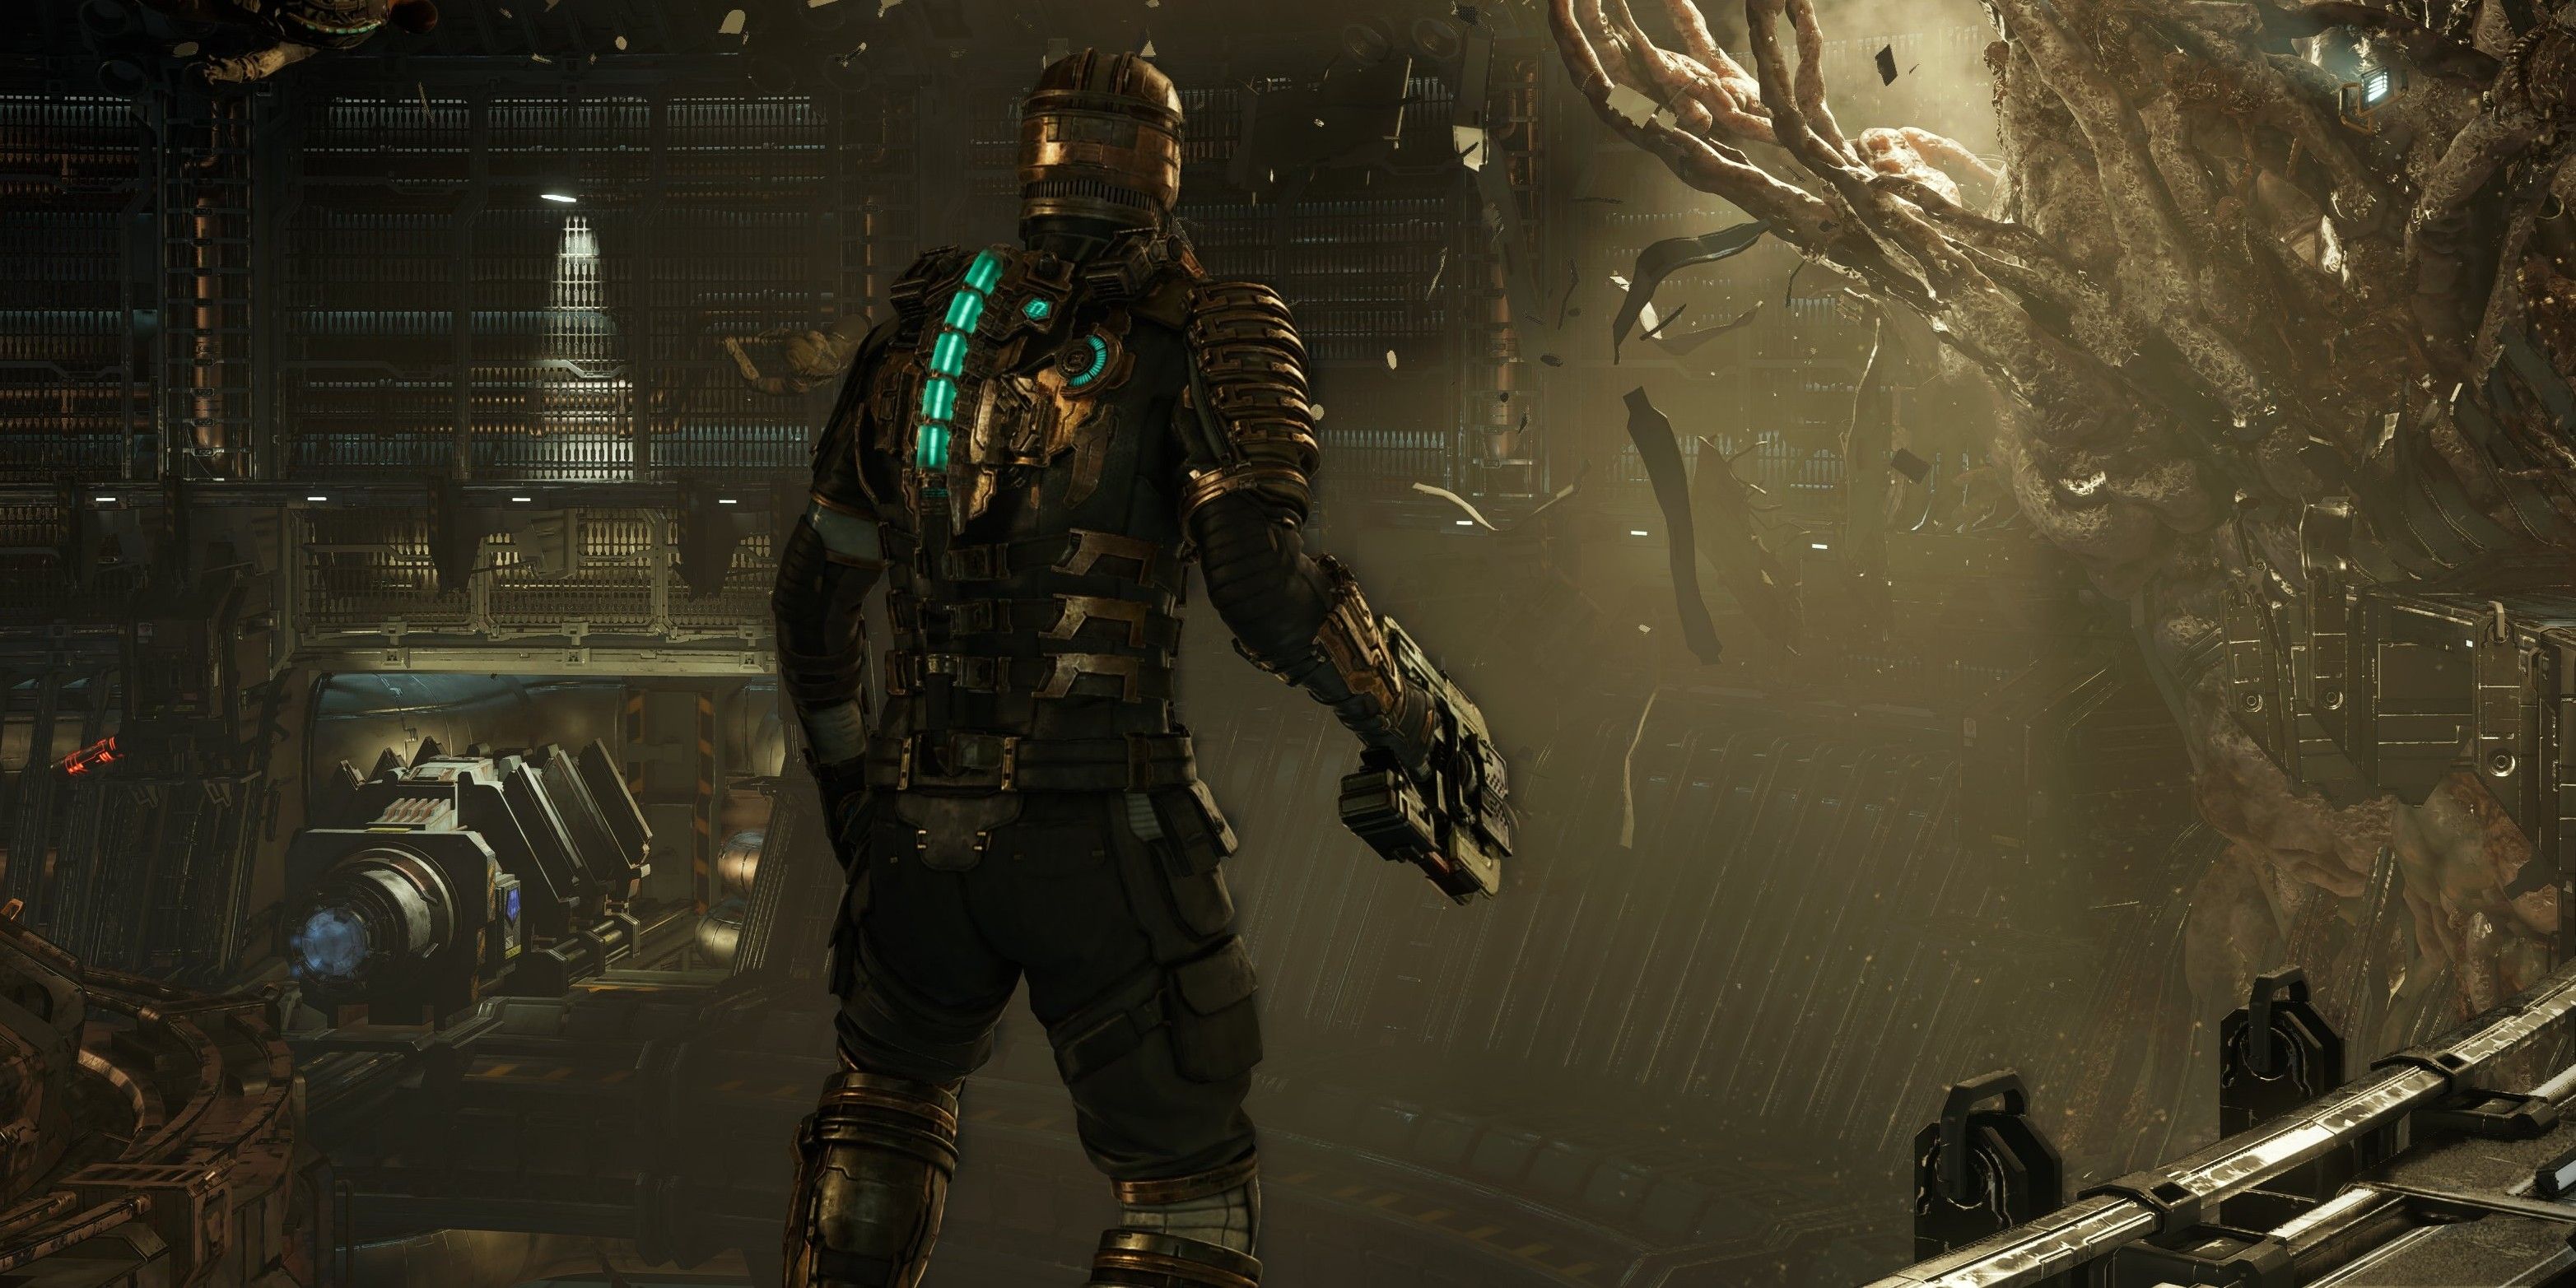 10 things you should know about 'Dead Space